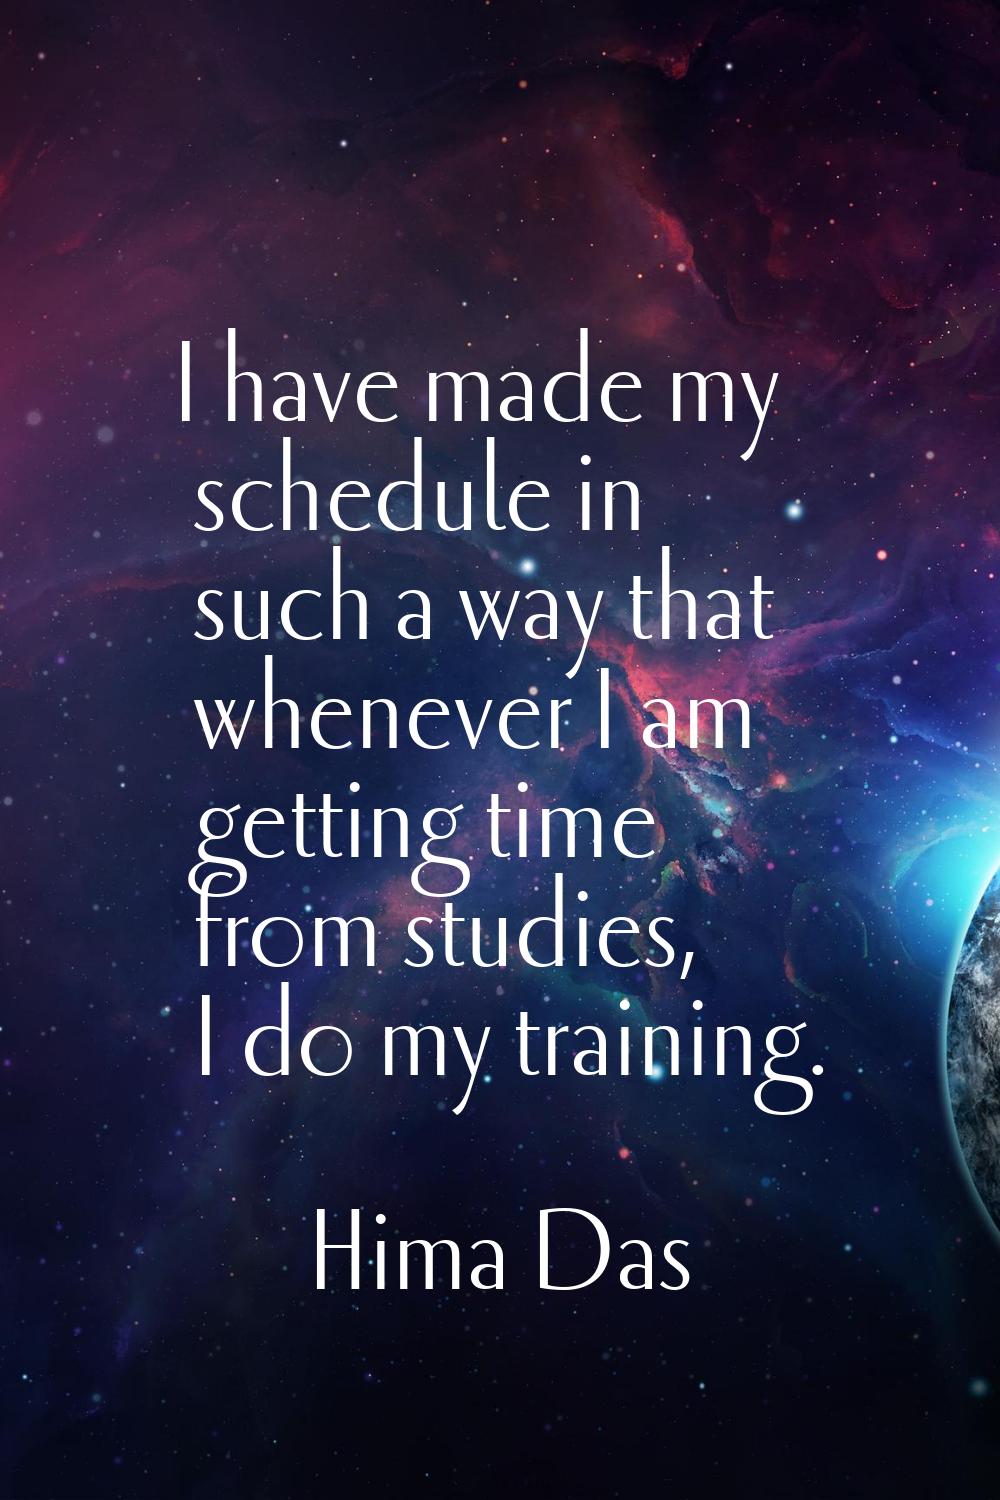 I have made my schedule in such a way that whenever I am getting time from studies, I do my trainin